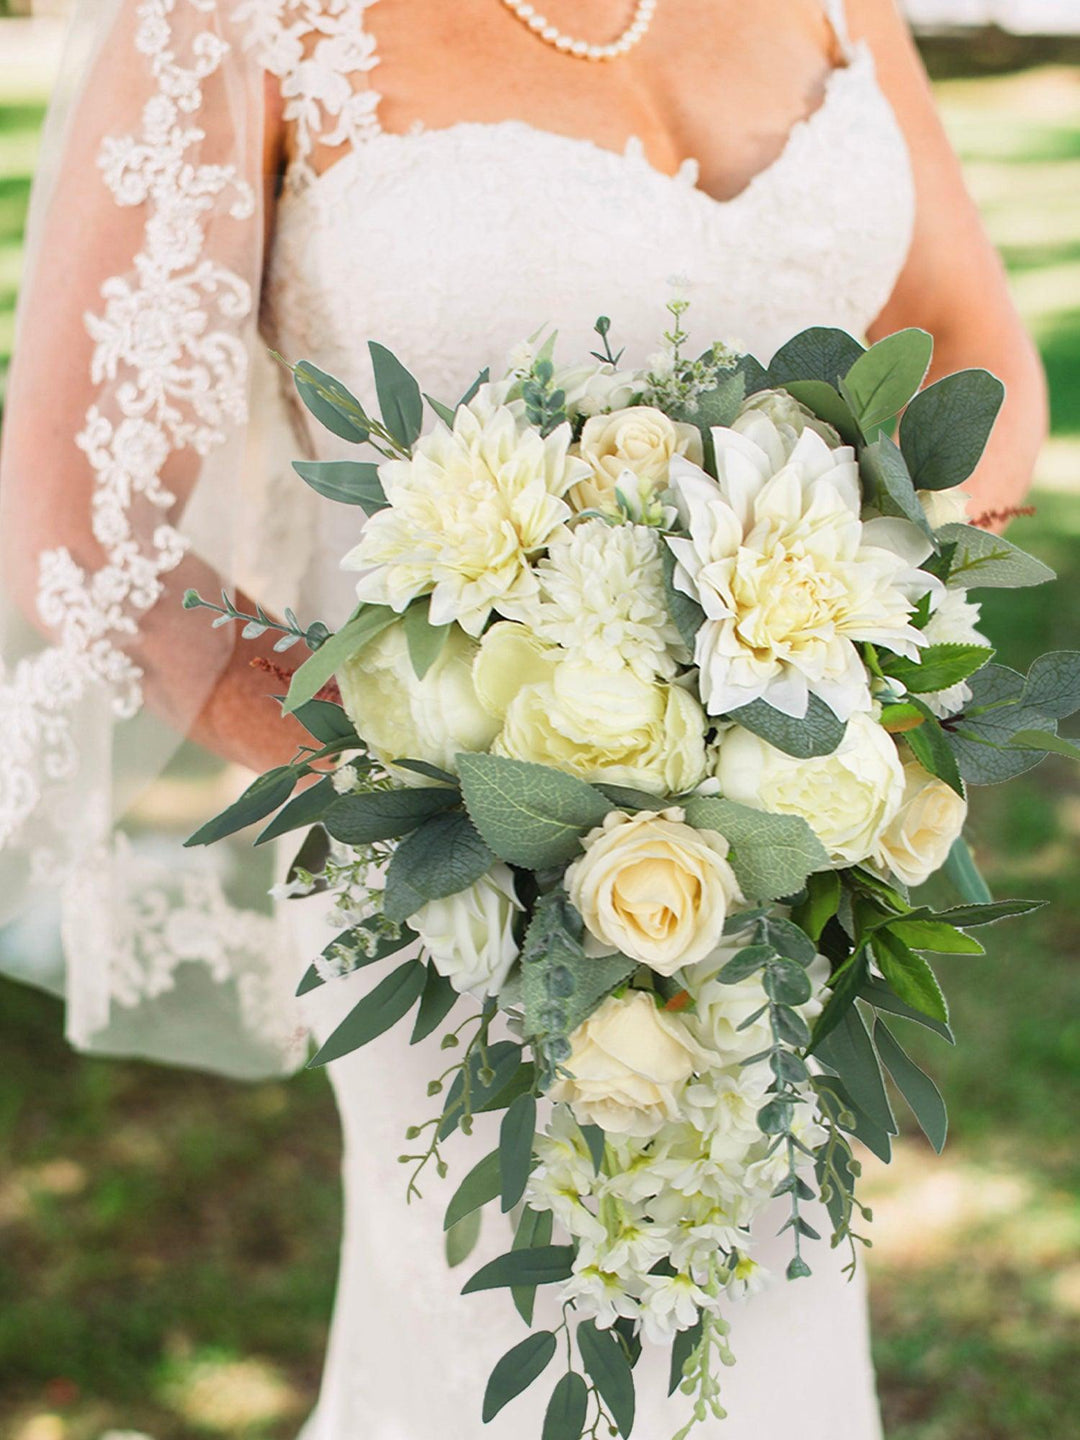 10 Stunning Cascading Wedding Bouquets You'll Absolutely Love - Rinlong Flower